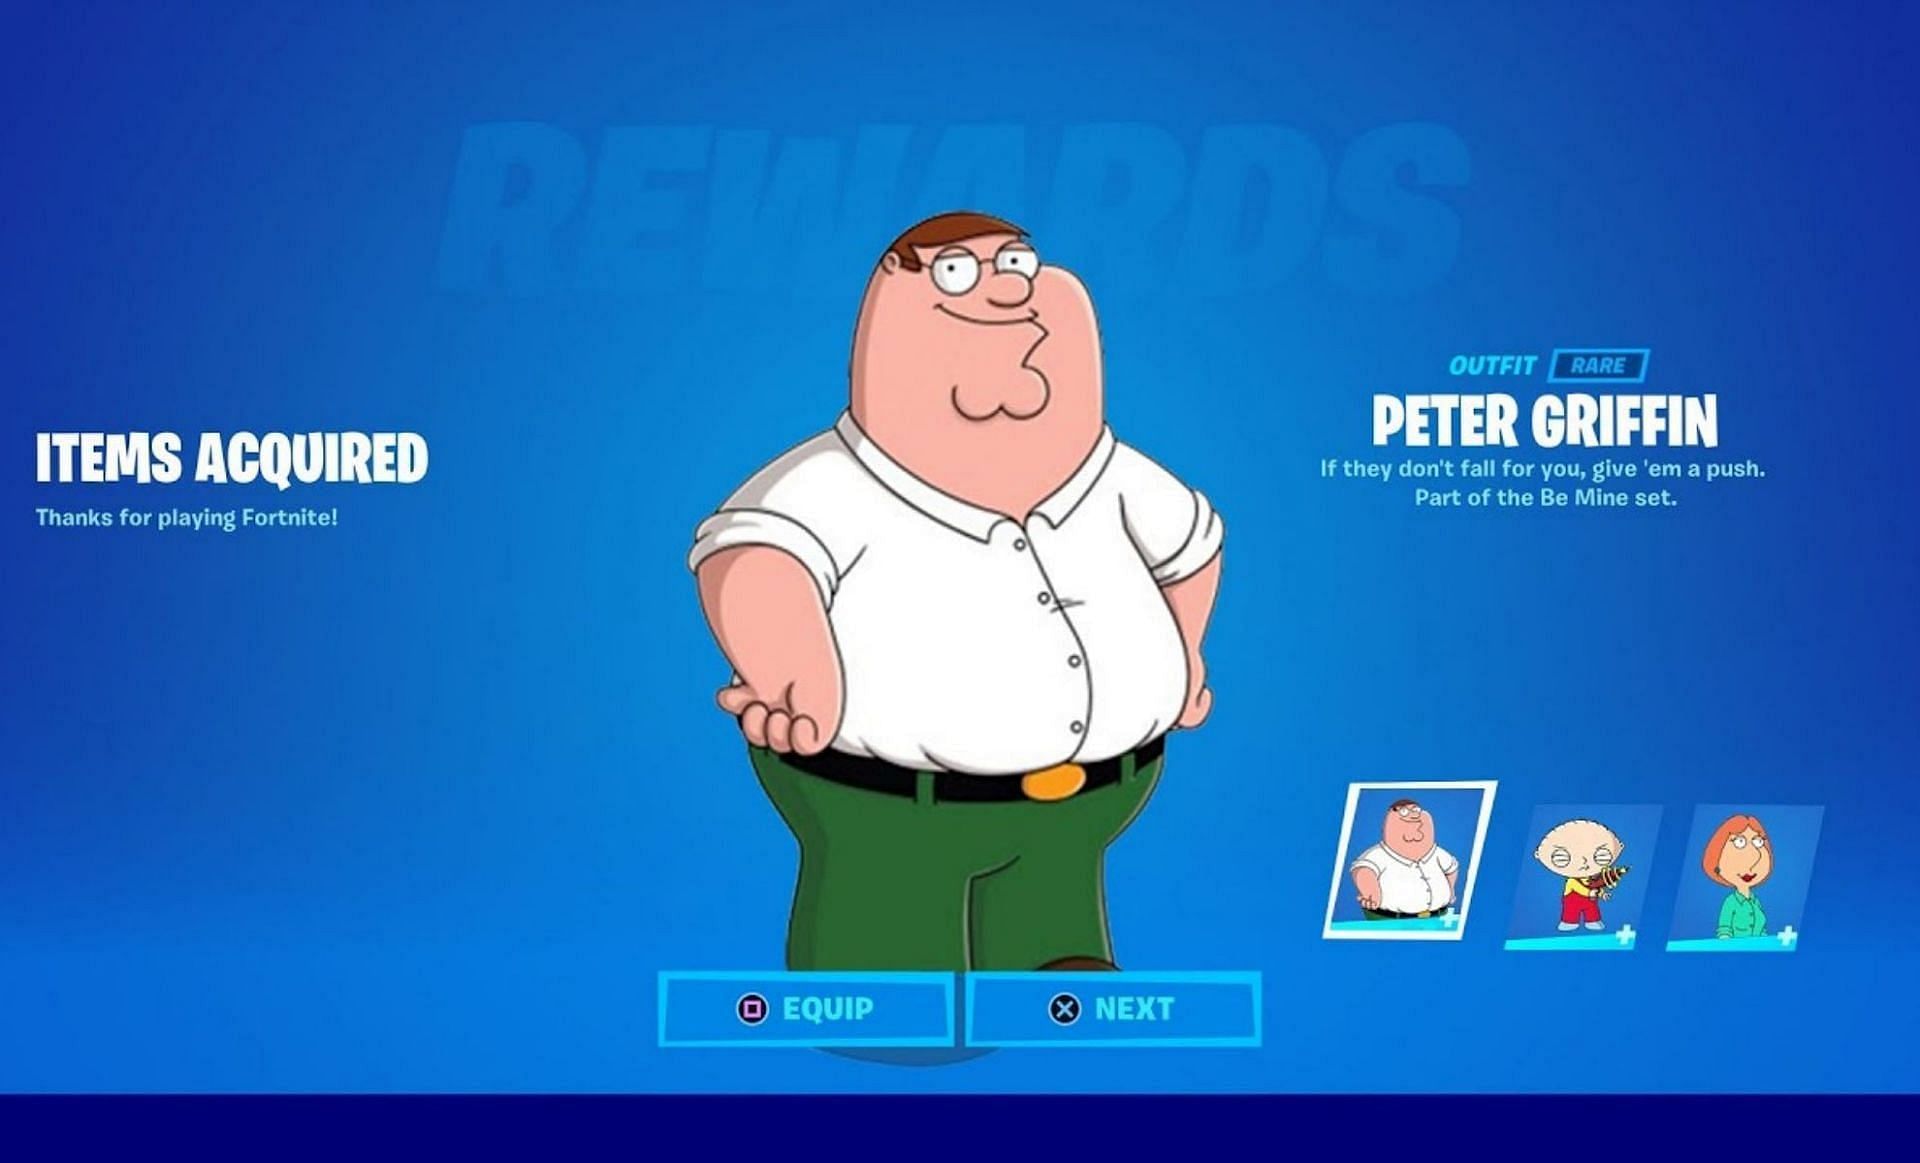 Peter Griffin Fortnite skin concept (Image via Pack A Puncher/YouTube)